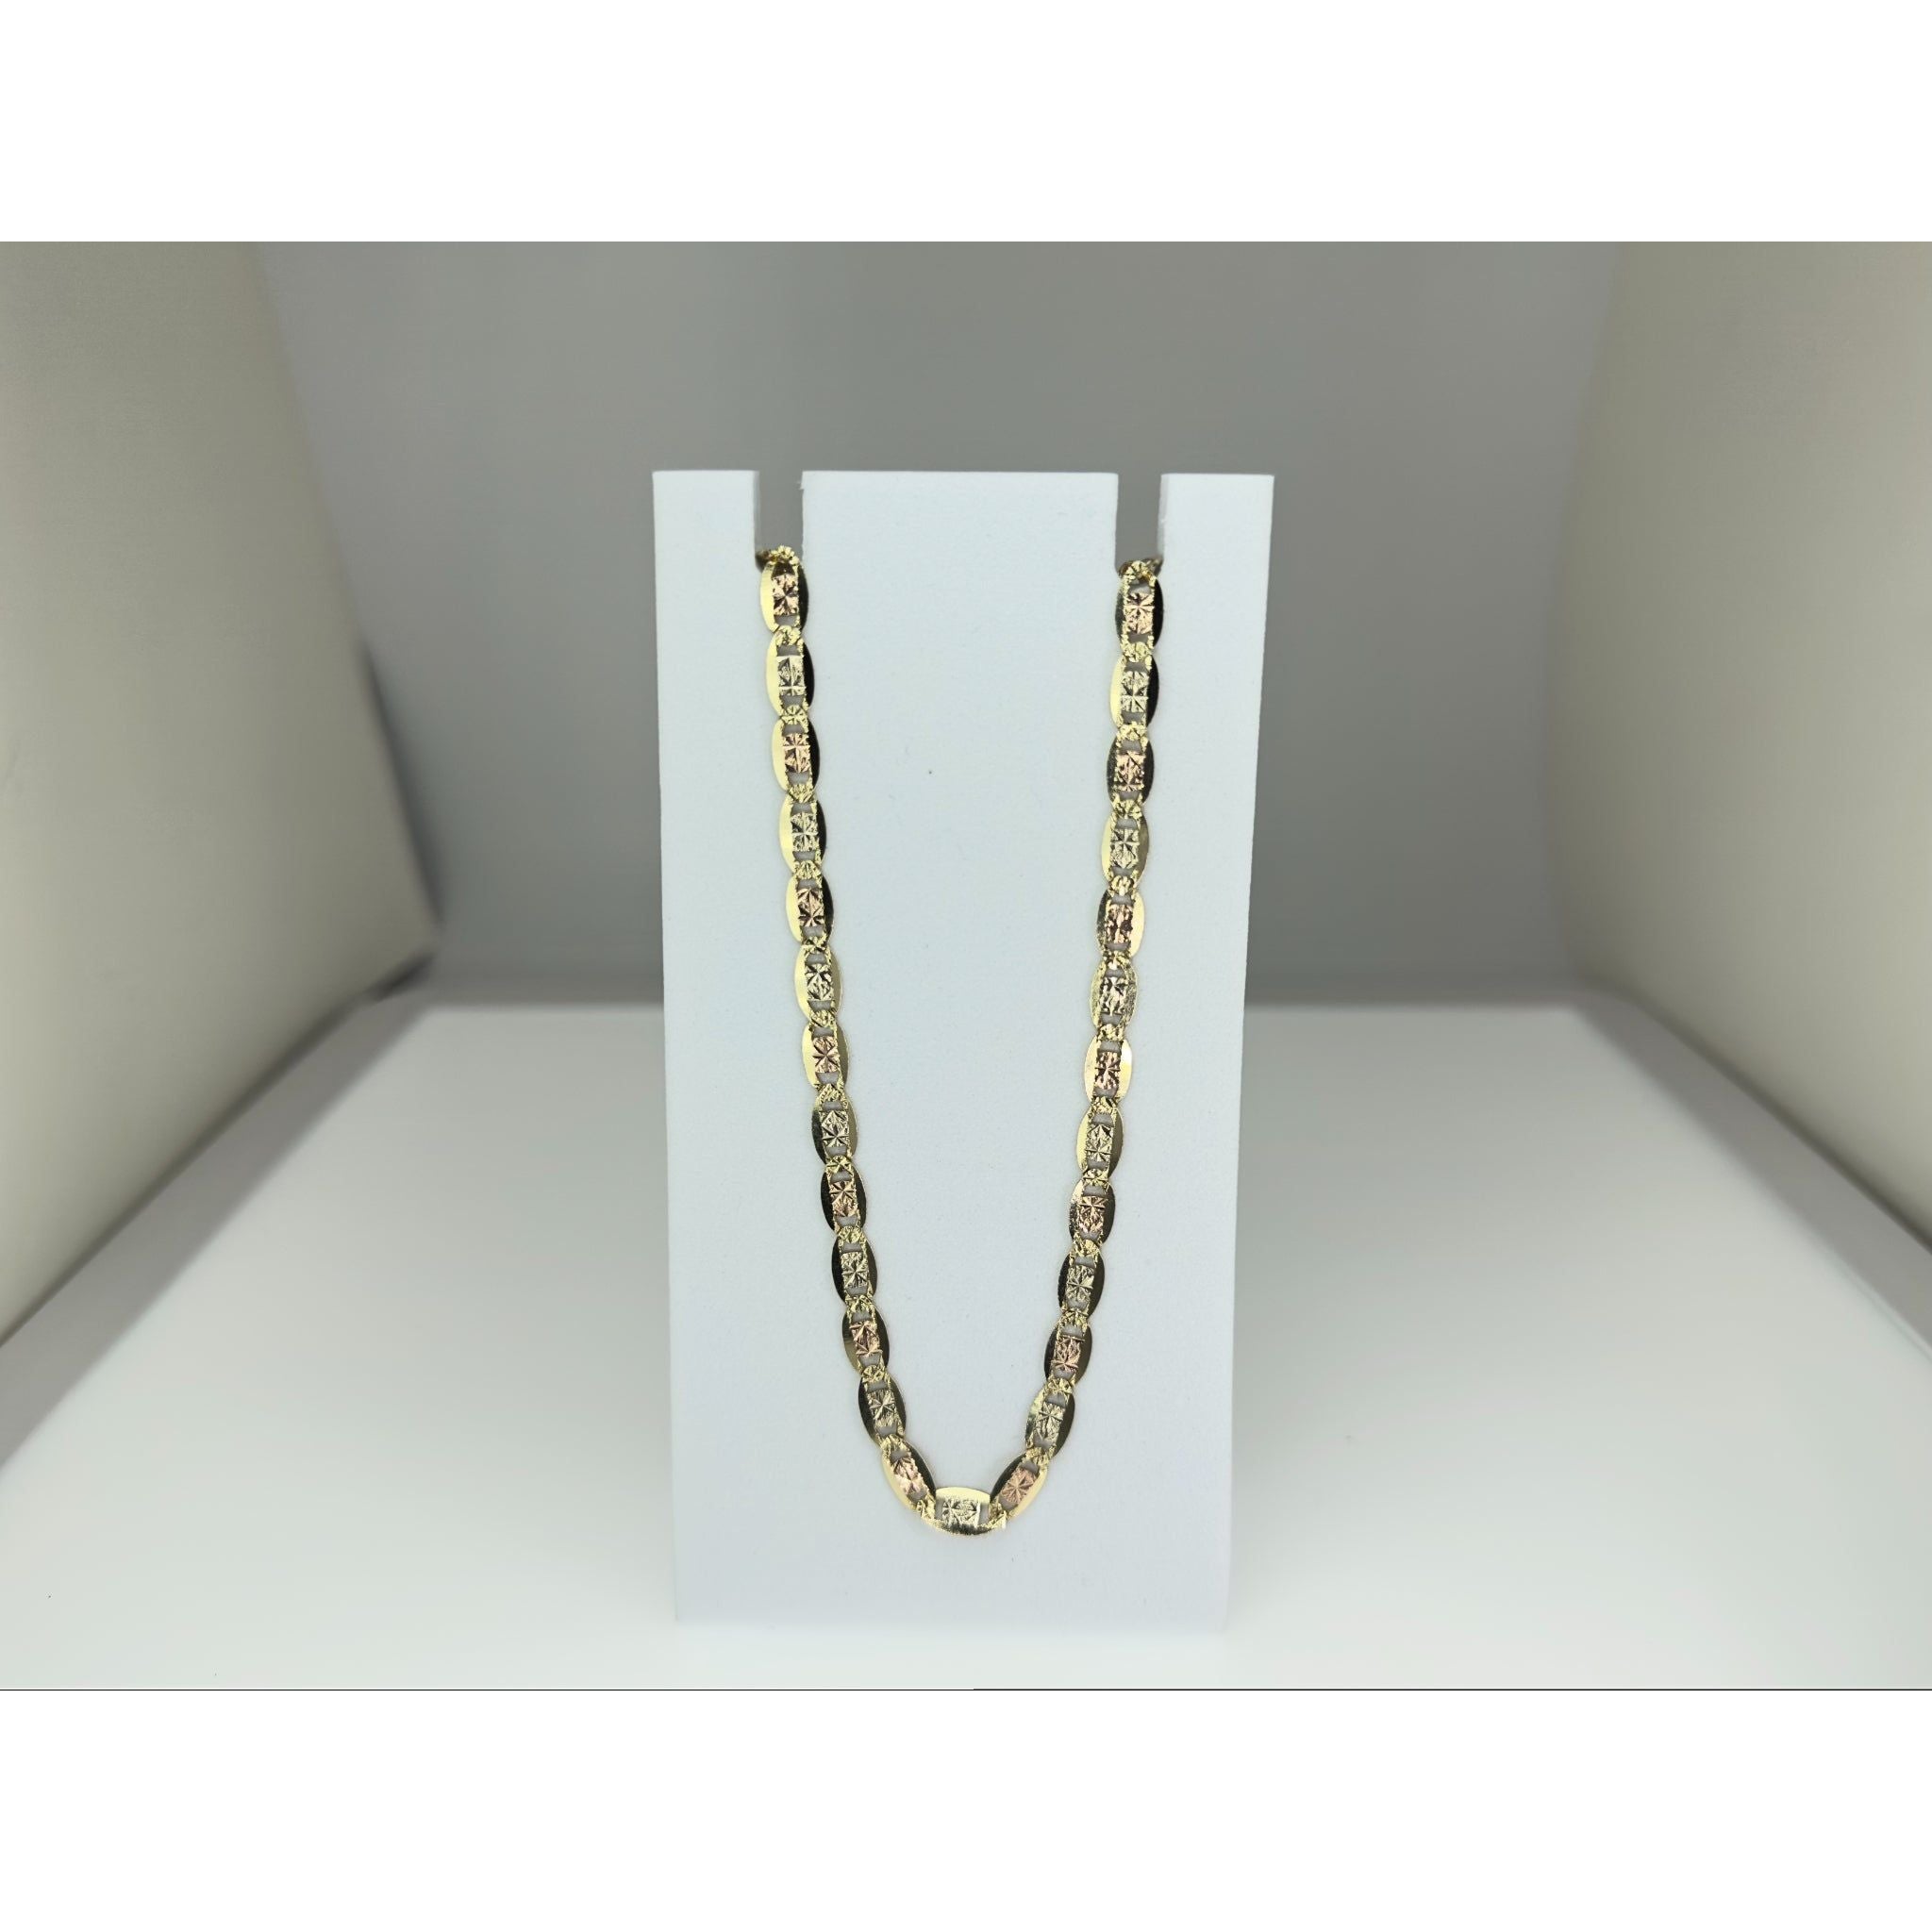 DR1722 - 14K Yellow Gold - Men's Gold Chains